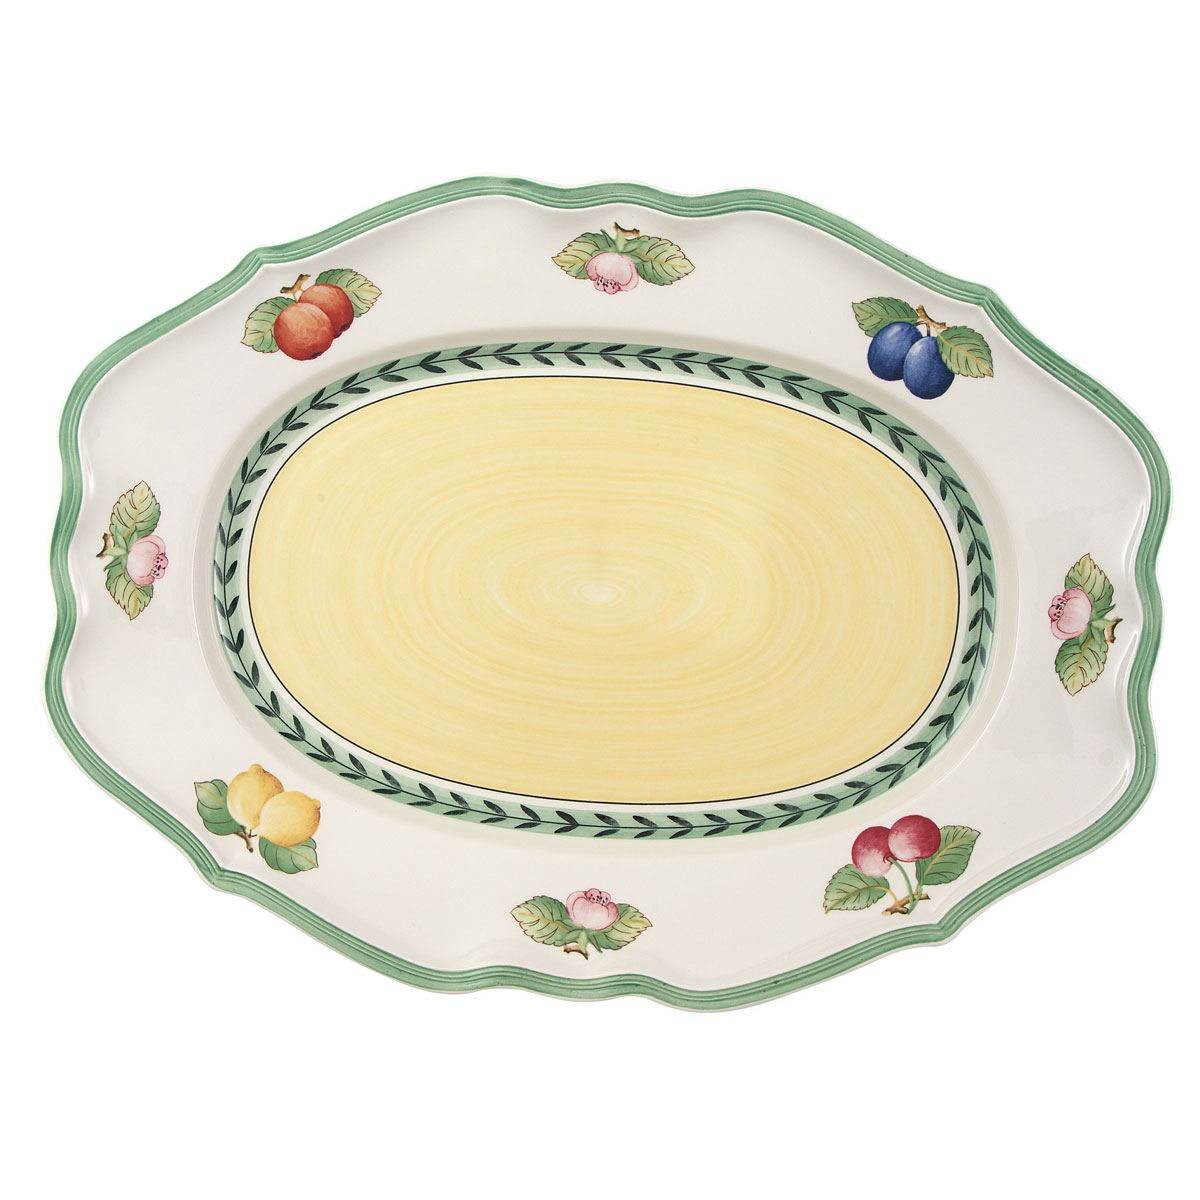 Villeroy and Boch French Garden Fleurence Oval Platter